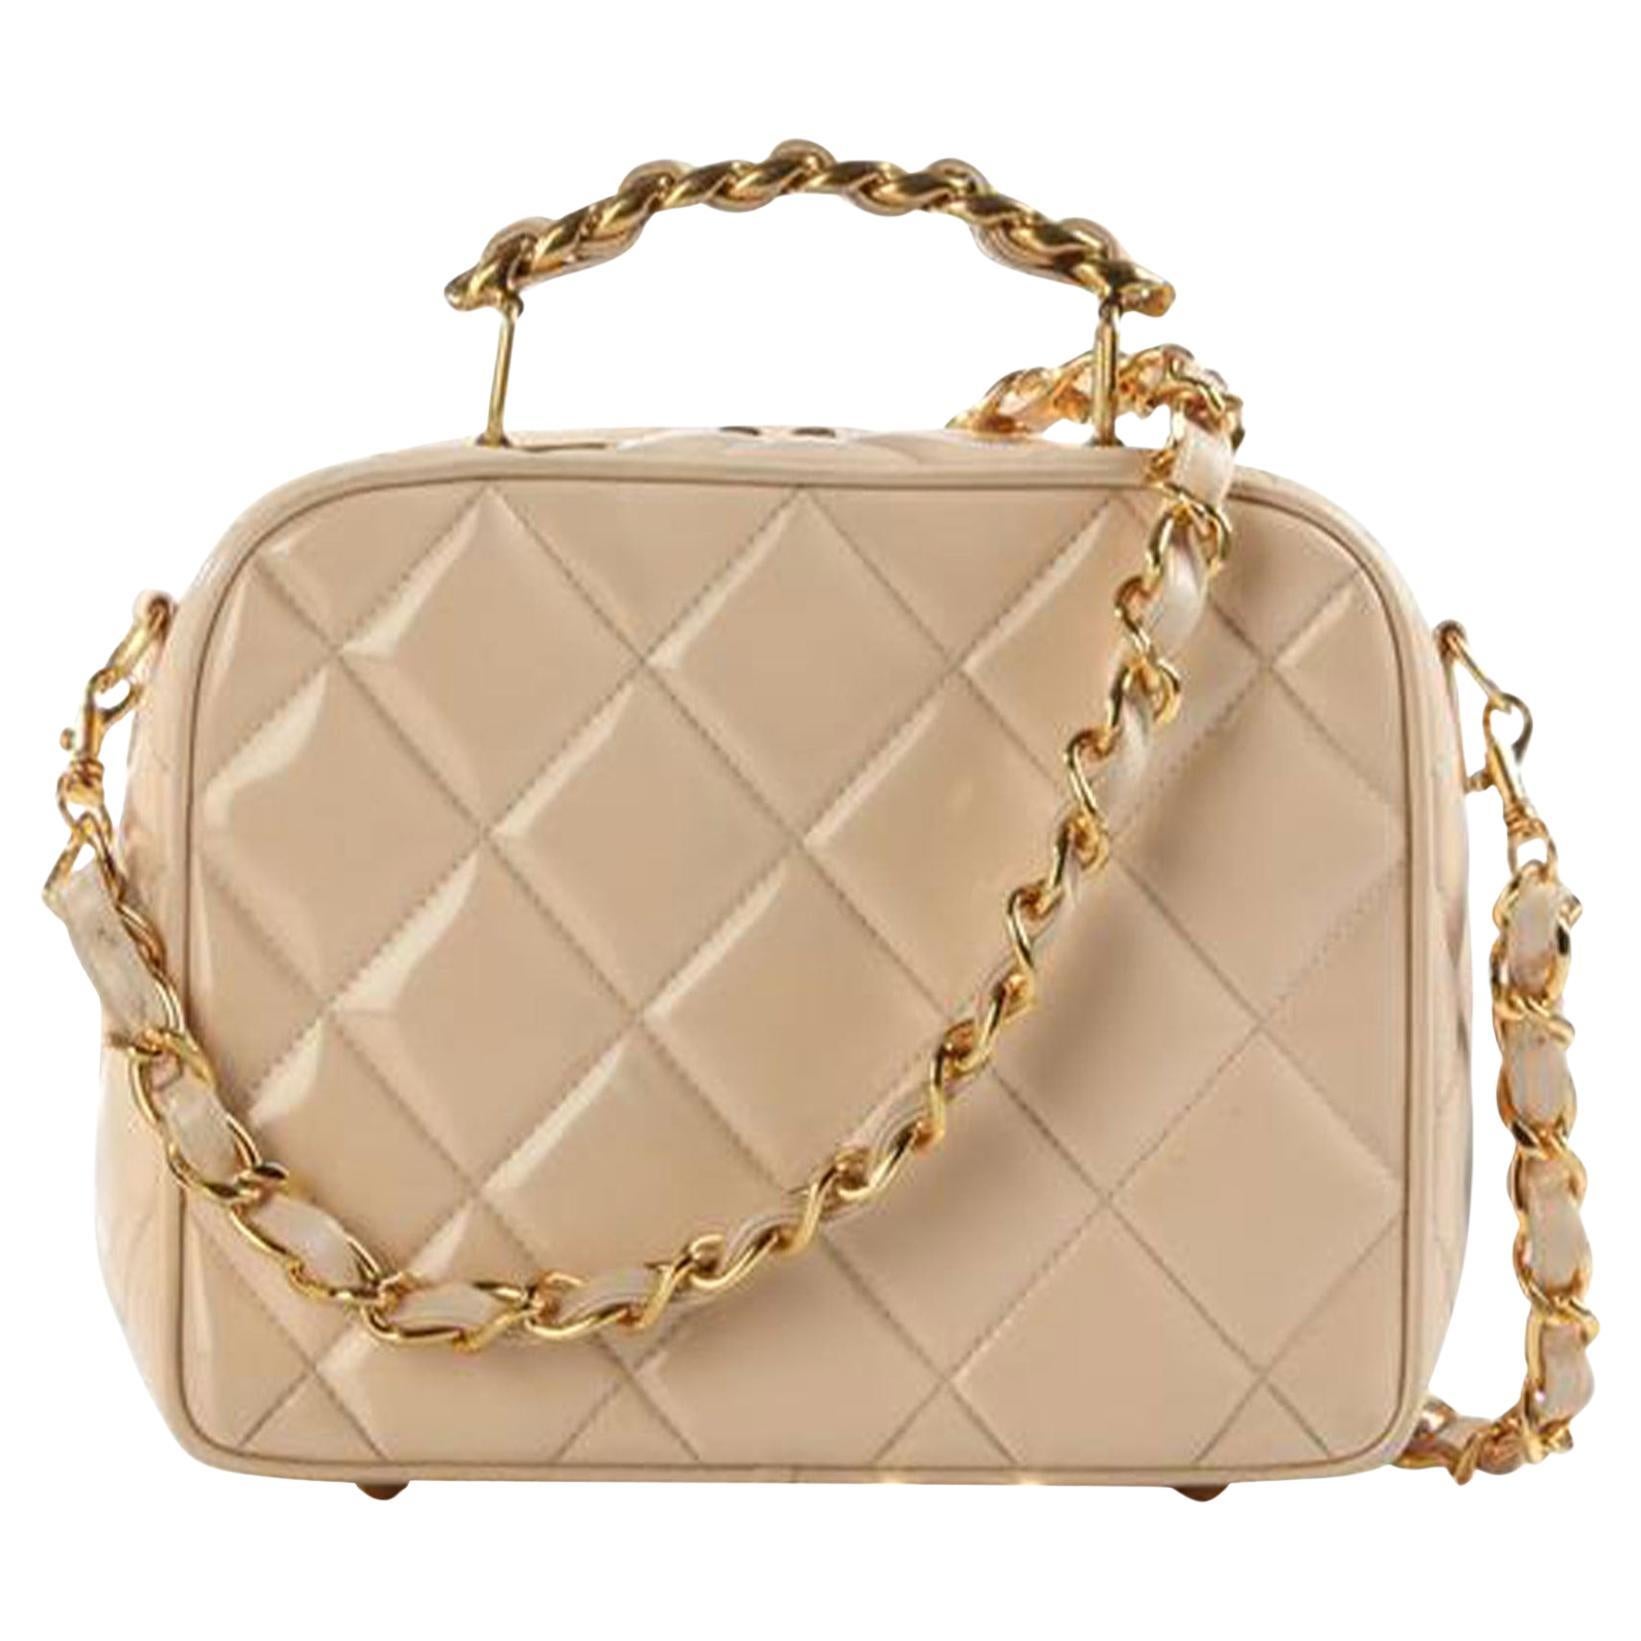 Chanel 1991 Camera Mini Quilted Vintage Rare Beige Nude Patent Cross Body Bag